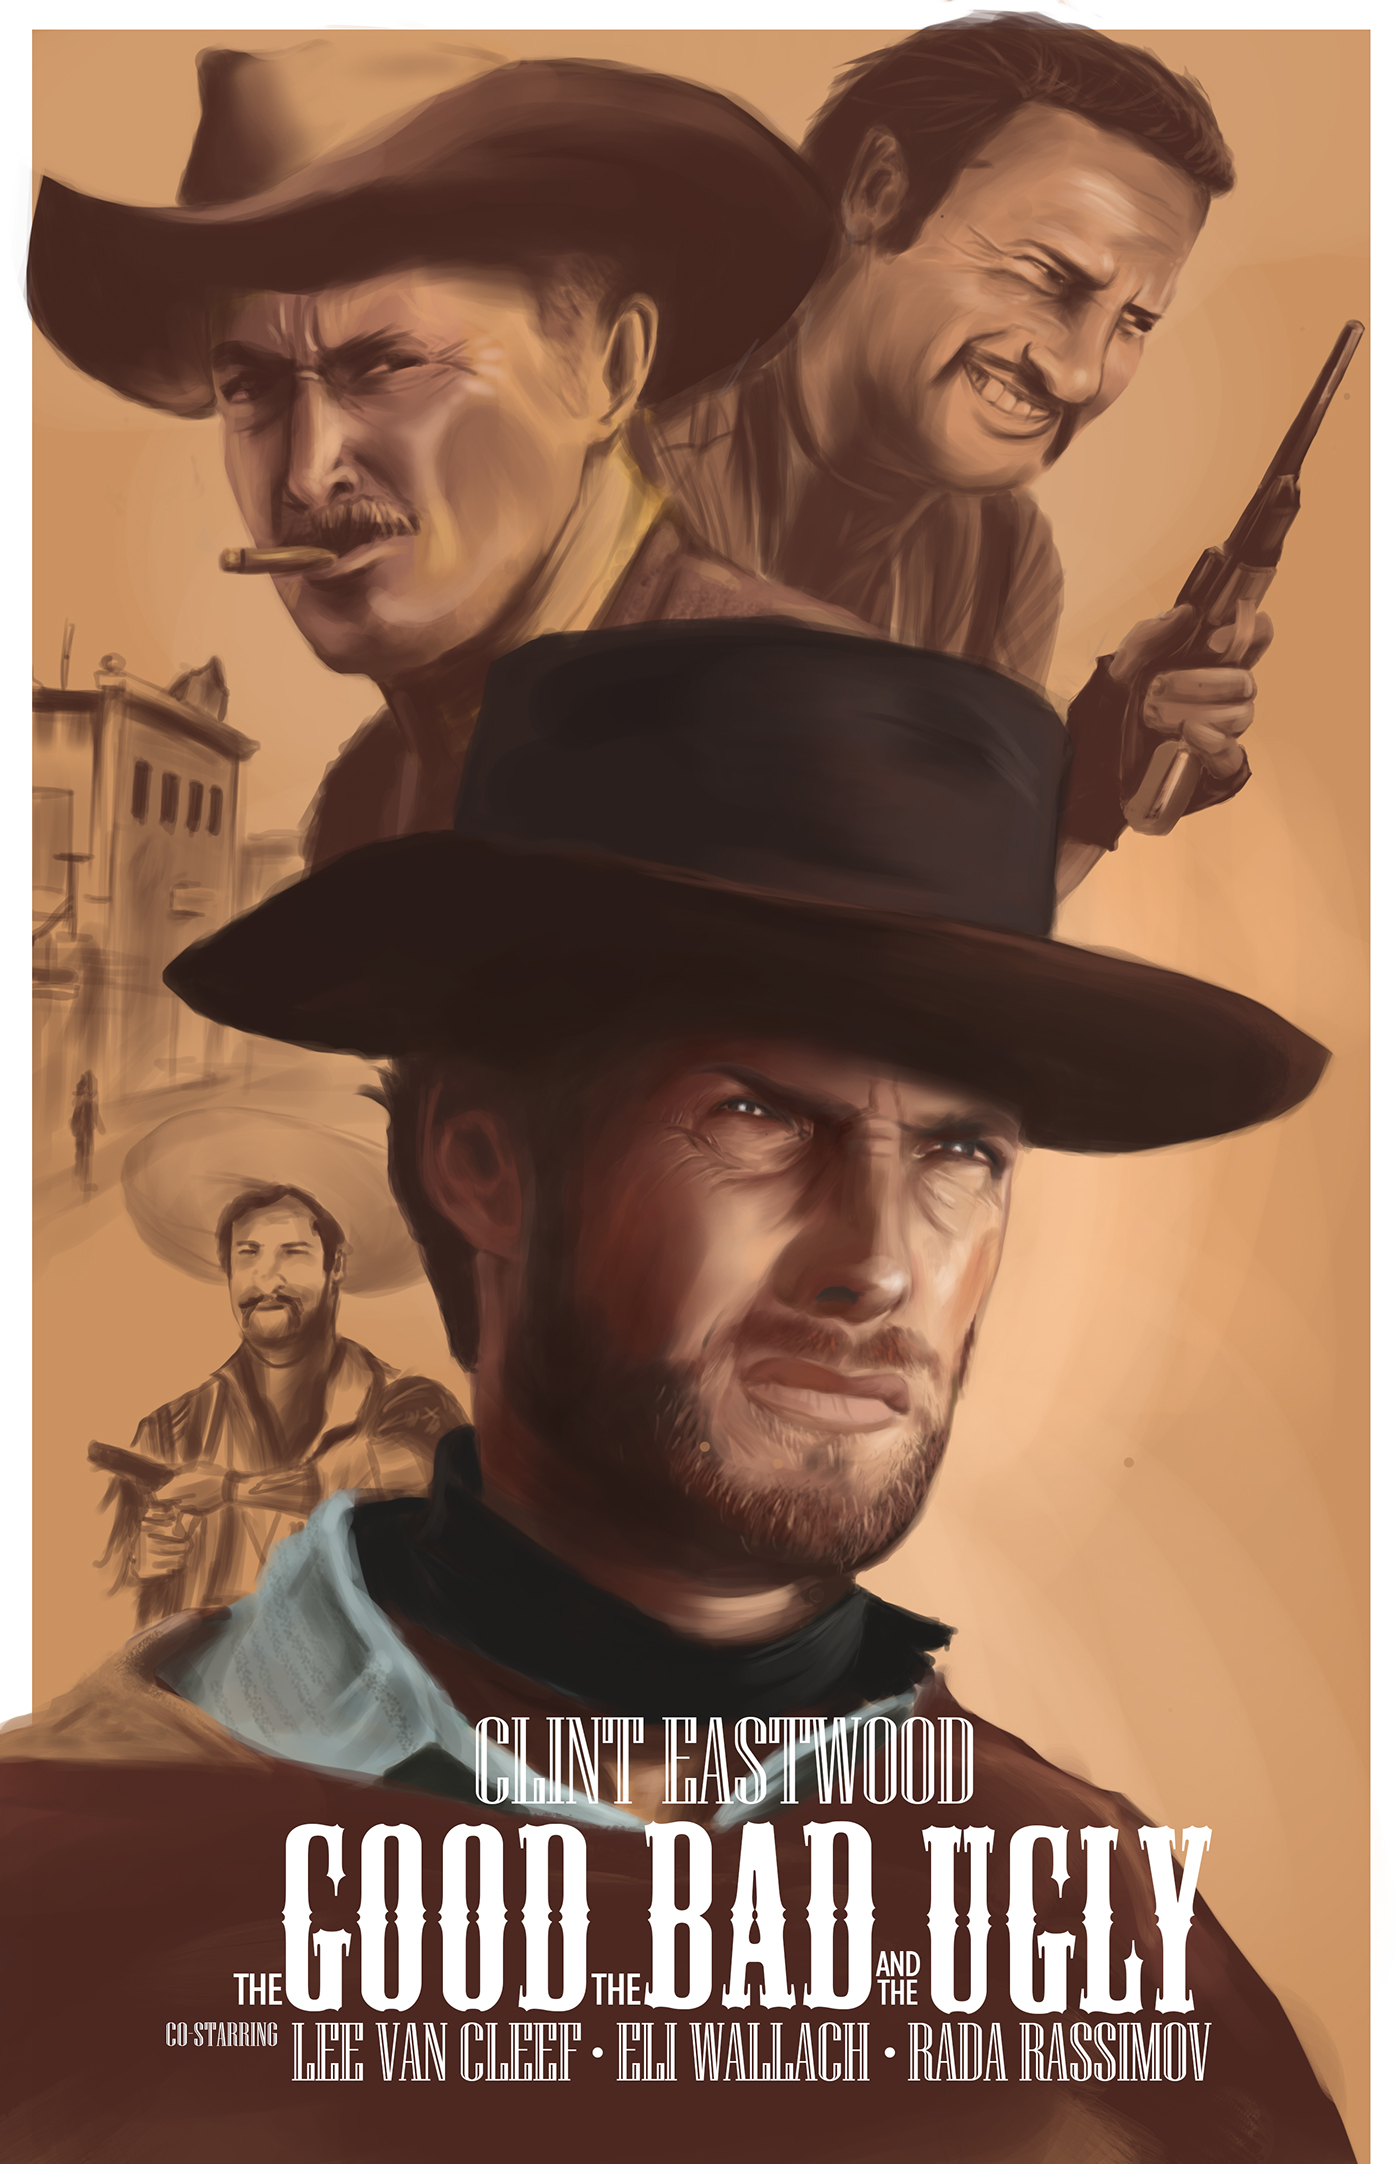 the good The Bad the ugly Clint eastwood painting   steven carrasco steven carrasco